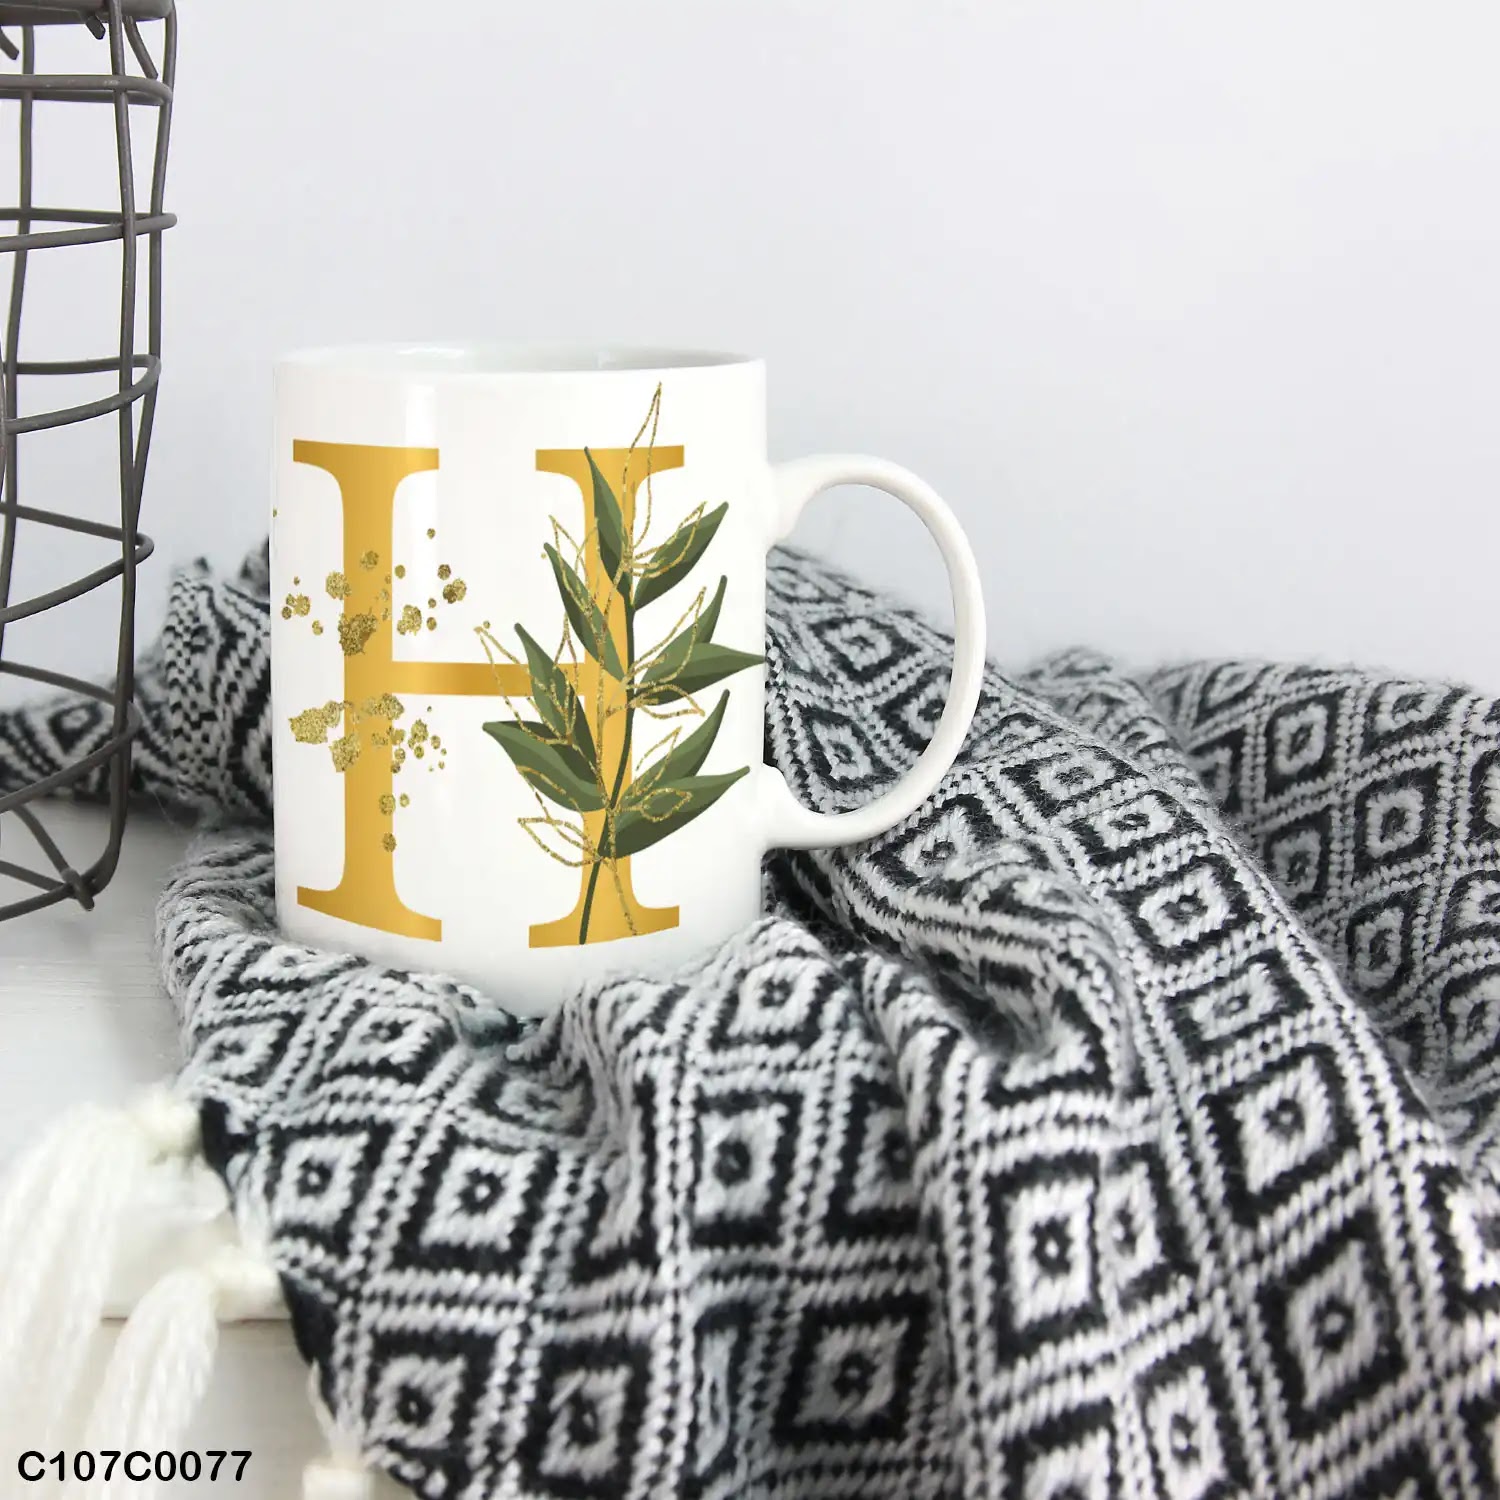 A white mug (cup) printed with gold Letter "H" and small green branch